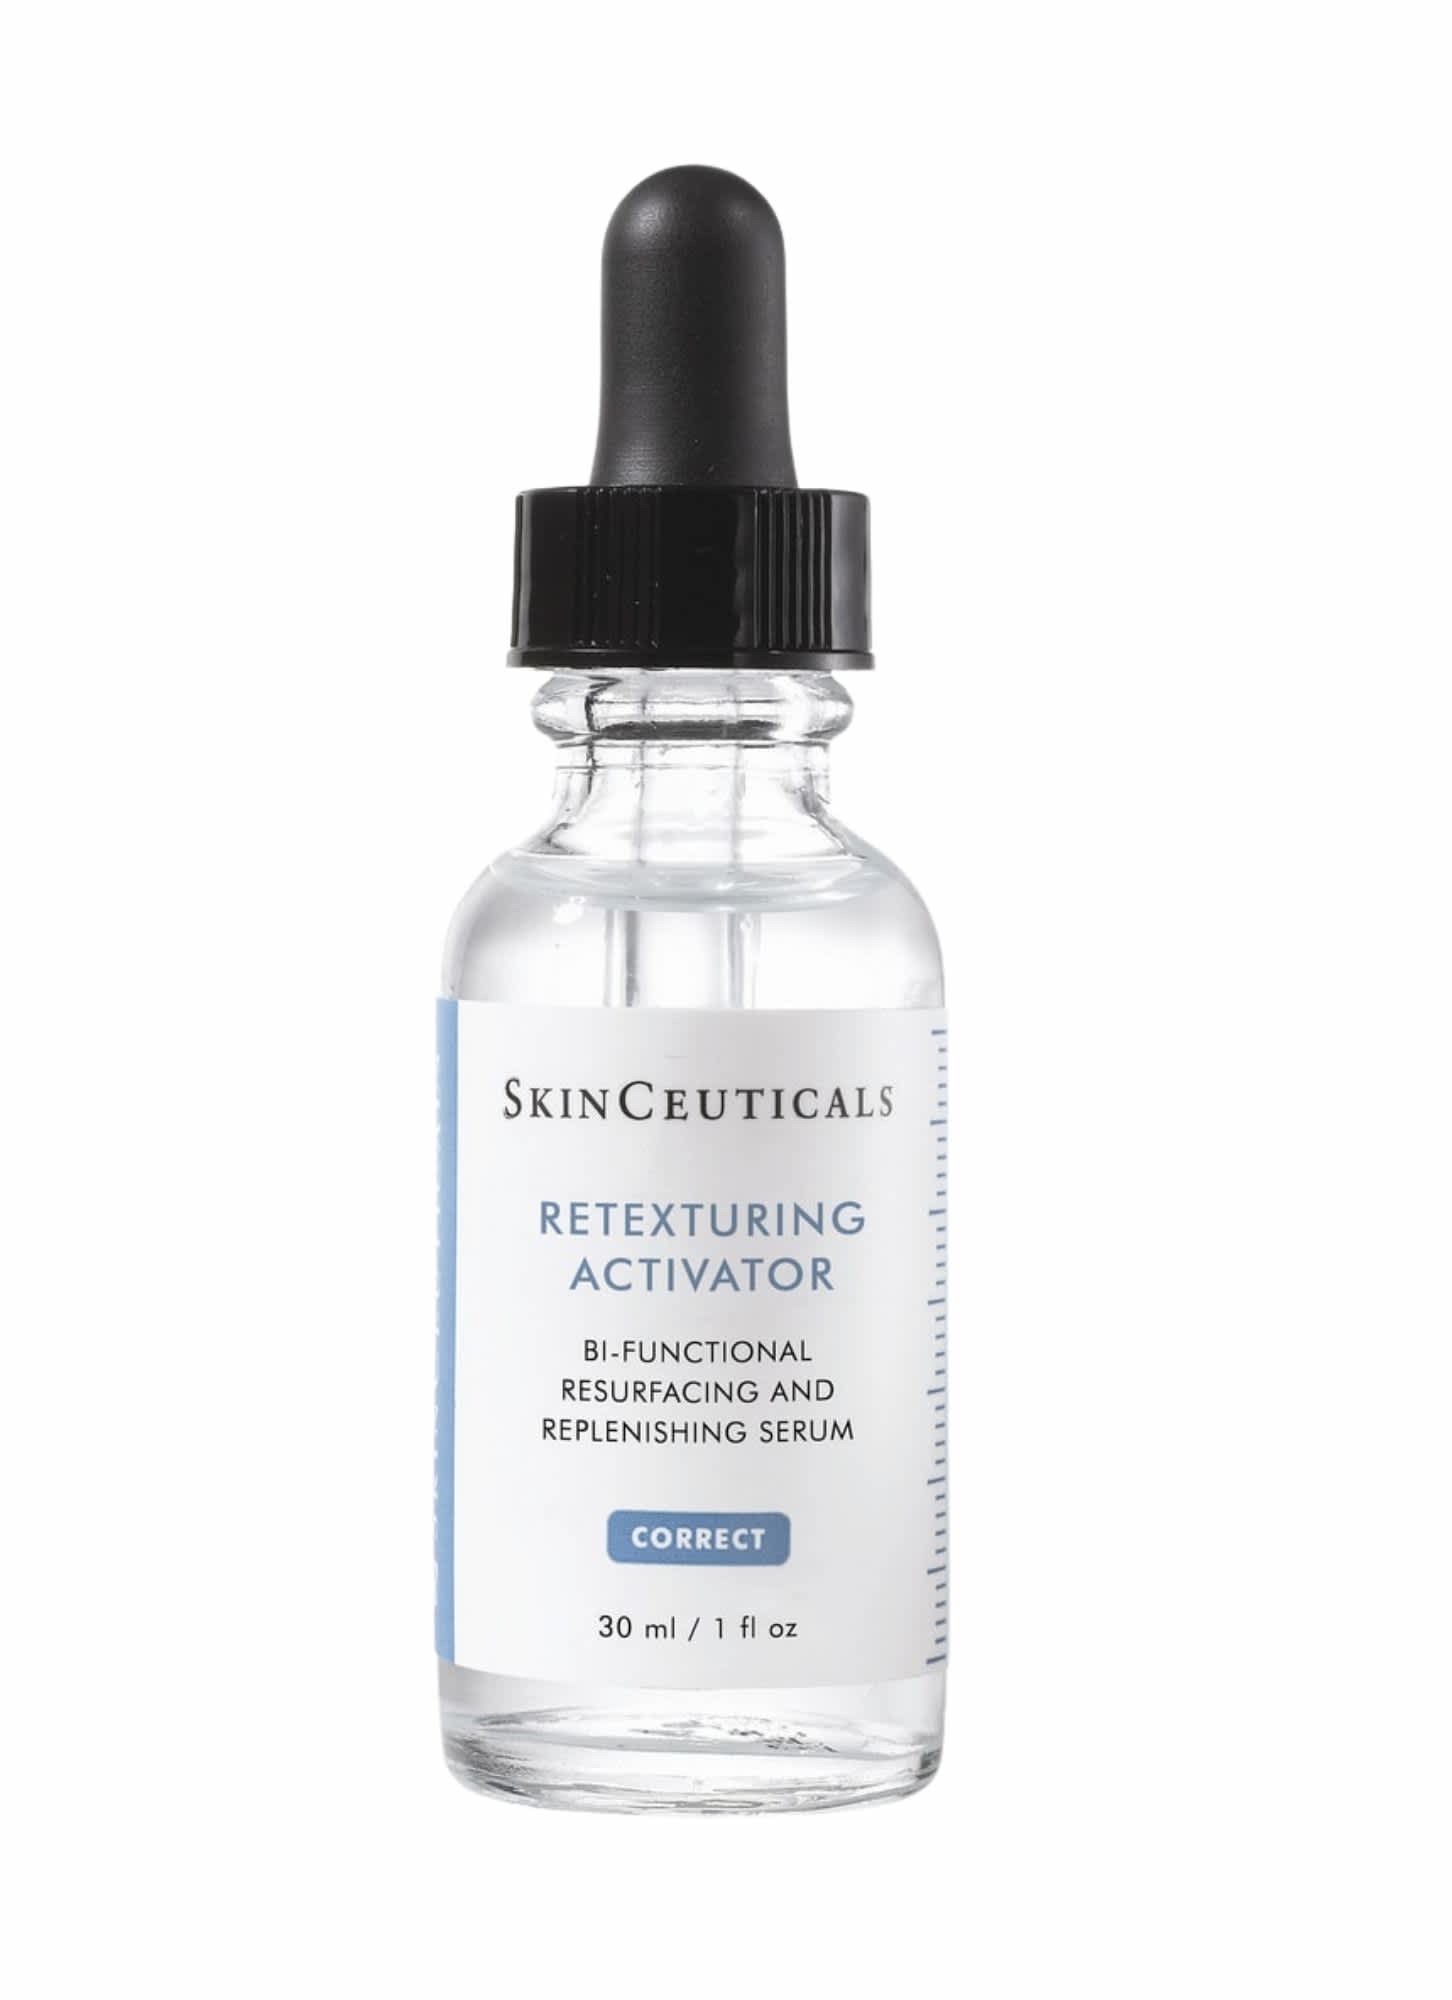 Skinceuticals, Retexturizing Activator, ($132) currently on 20% discount at Adore Beauty